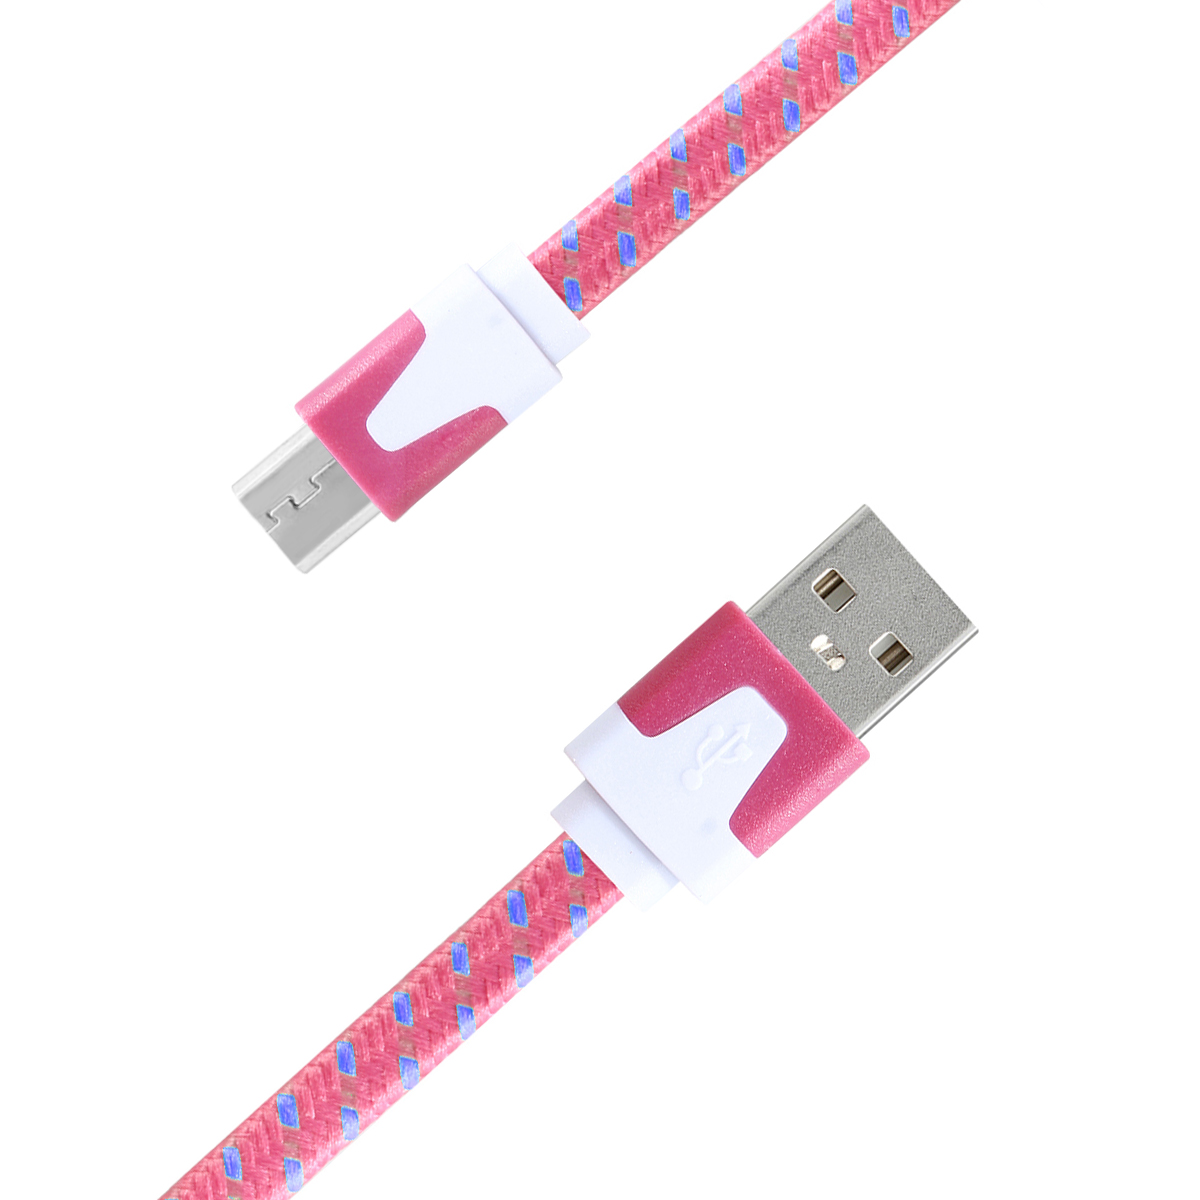 3m Weave Braid USB Data Sync Charging Cable for Samsung Android Phones - Pink